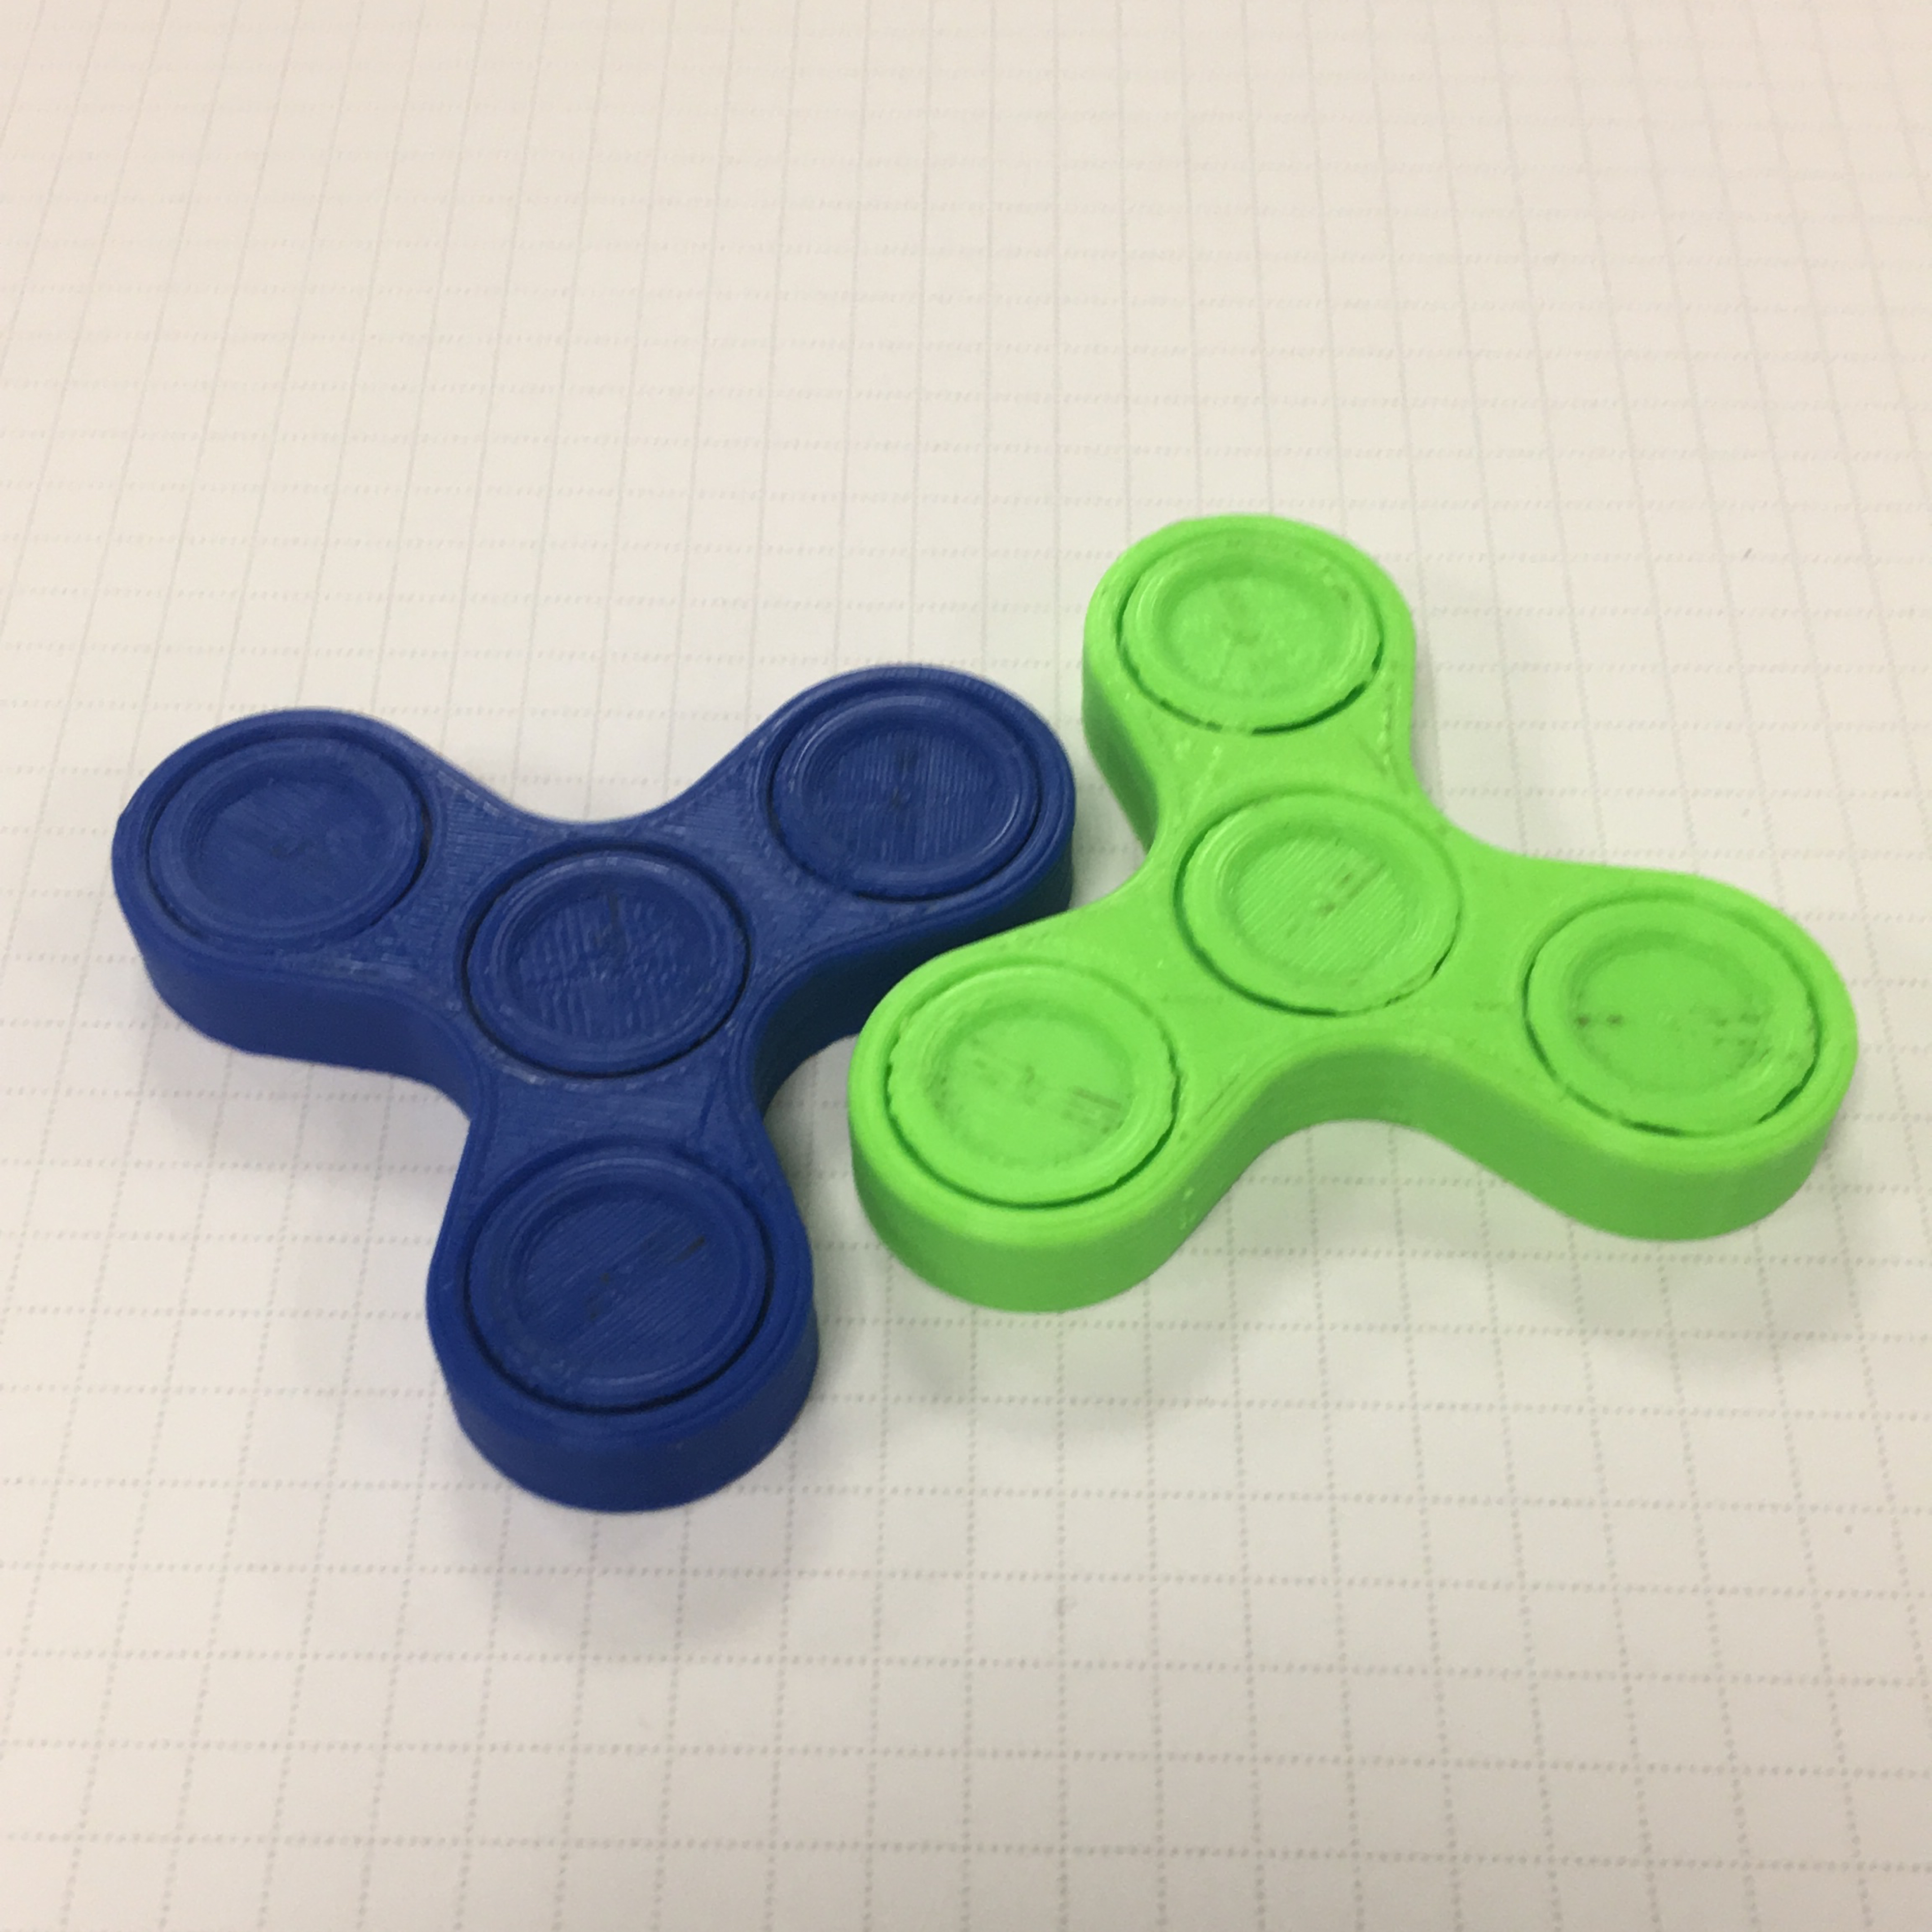 3D Printable Fidget Spinner OnePiecePrint / No Bearings Required! by Muzz64